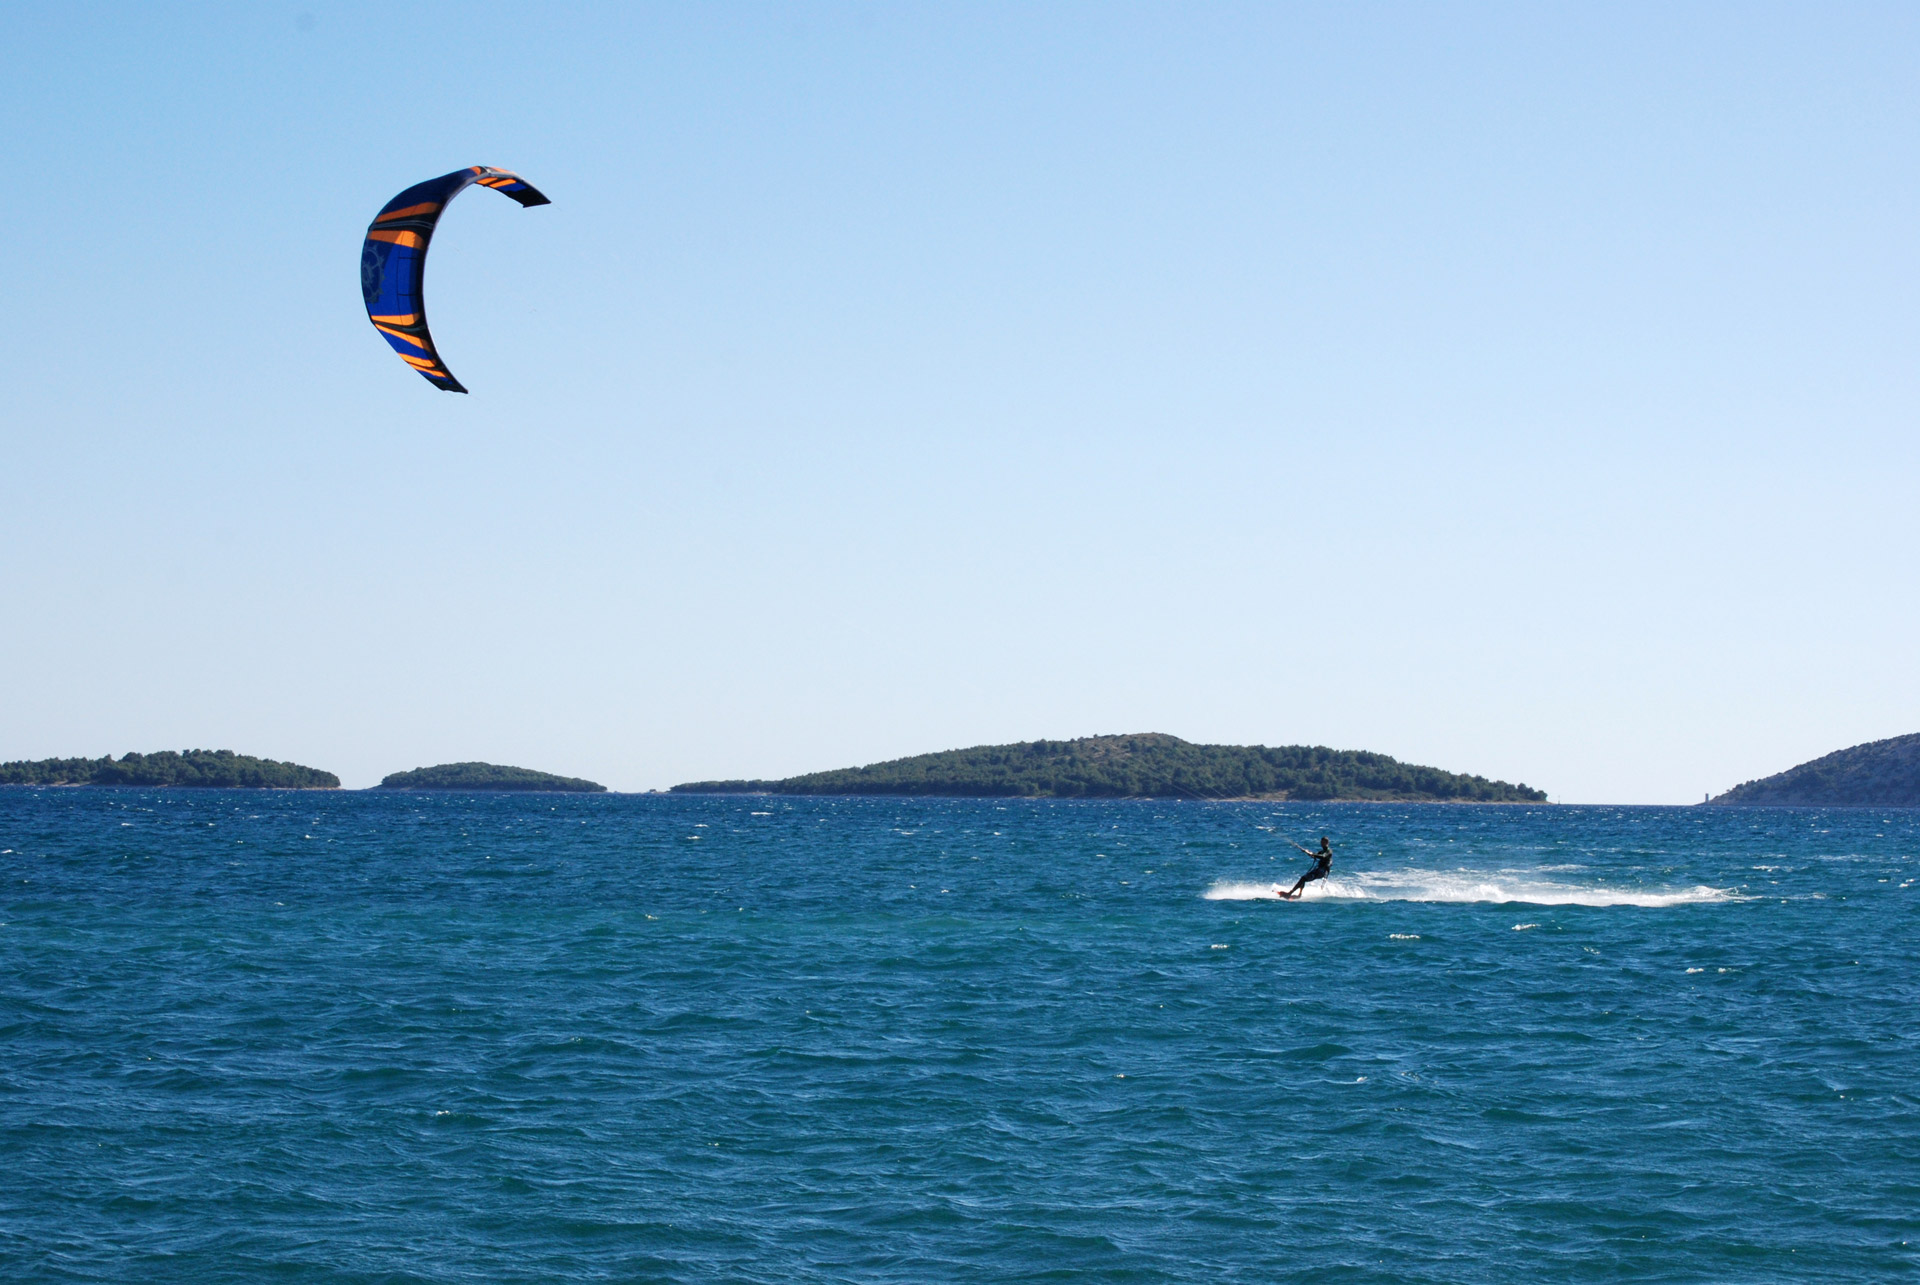 Skillful kite surfer rides the waves at Adriatic Sea